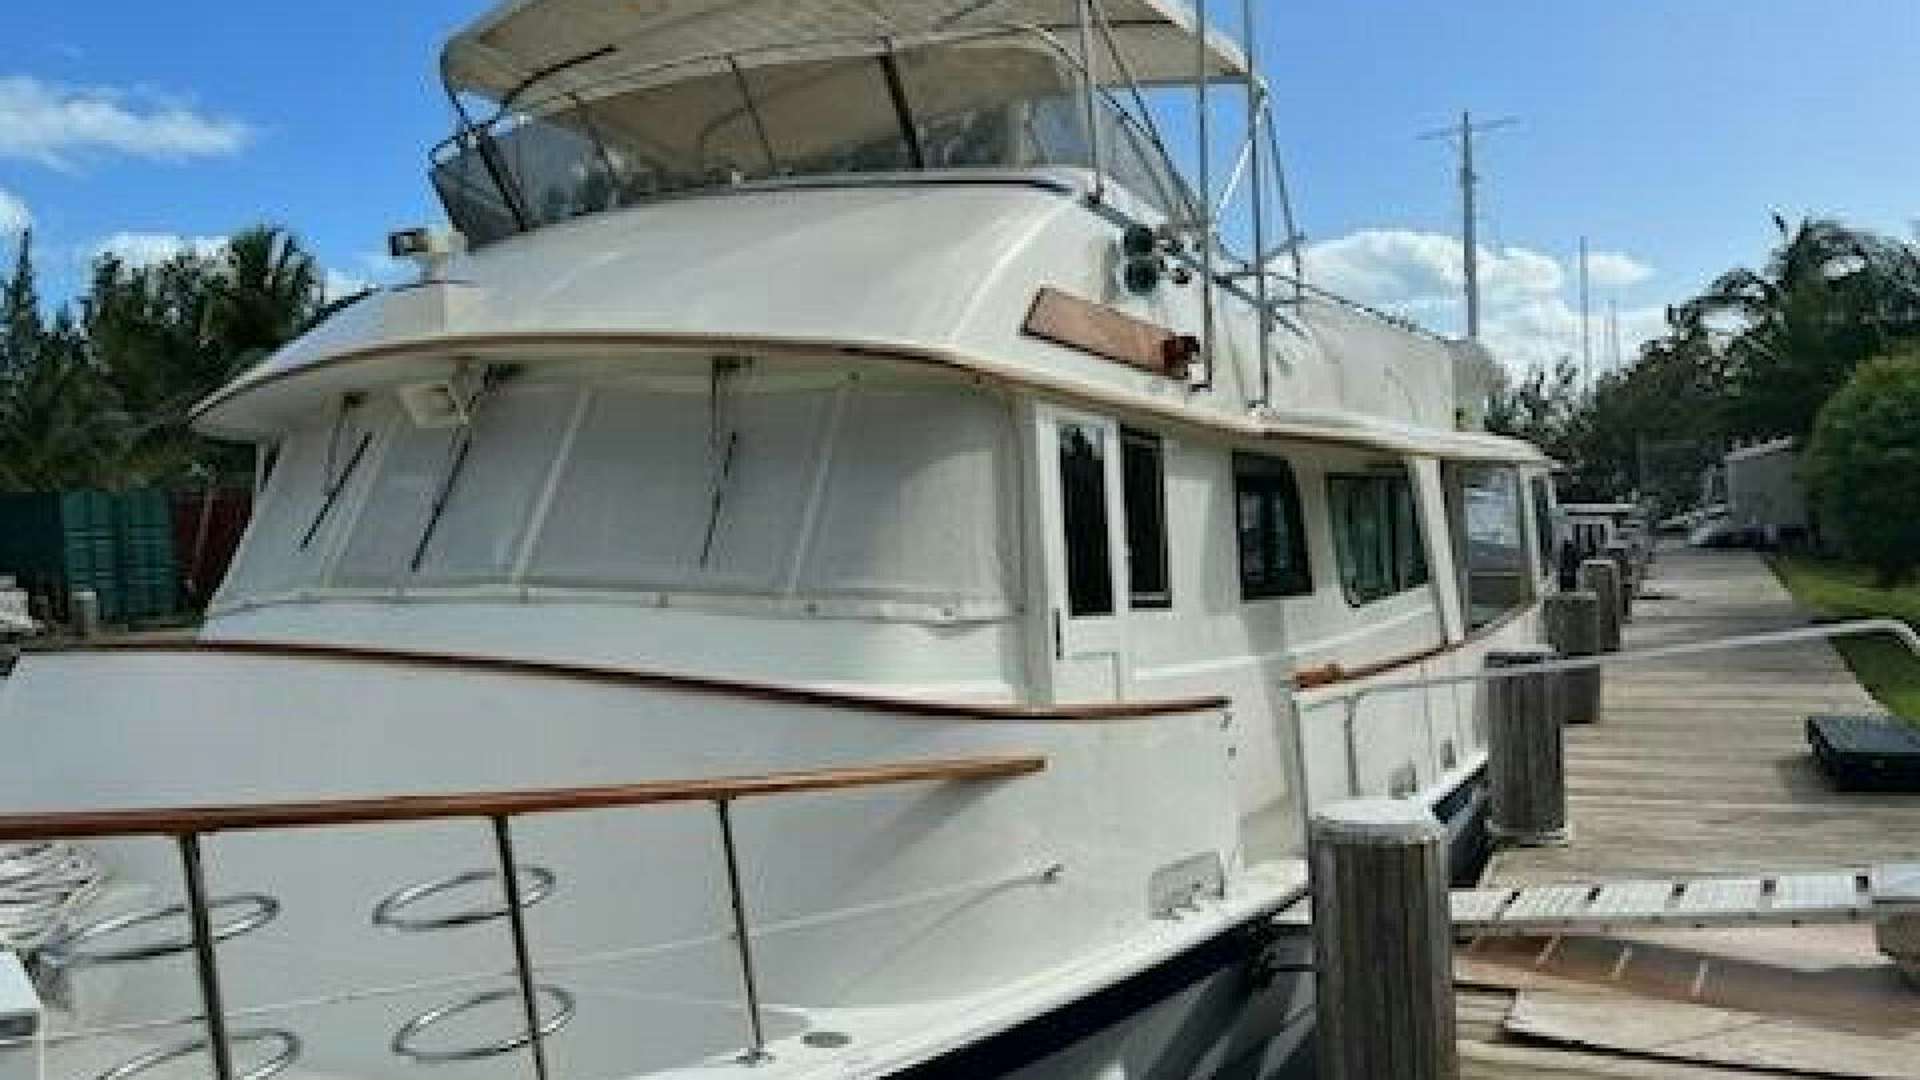 Beginners mind
Yacht for Sale